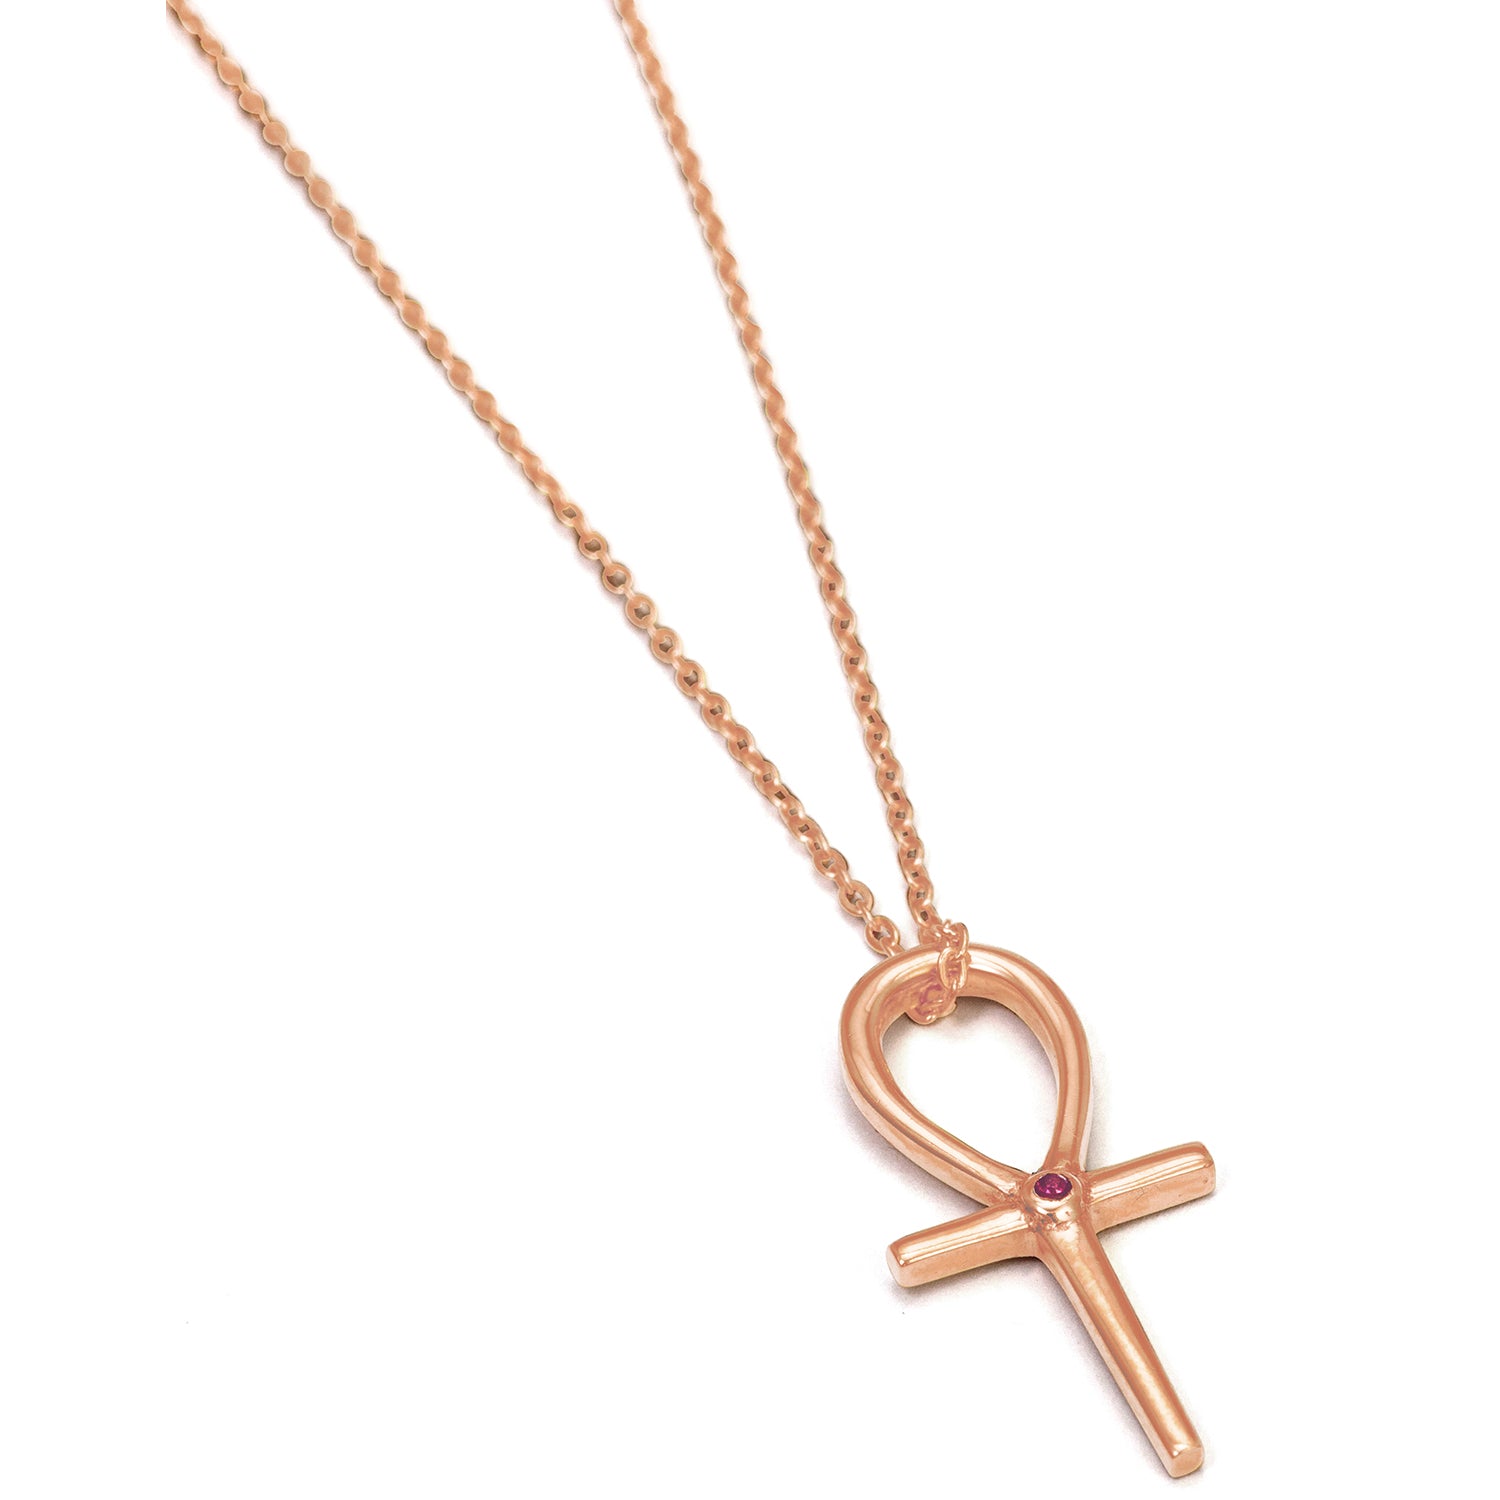 Ankh pendant made from rosegold-plated Sterling silver with ruby - key of life